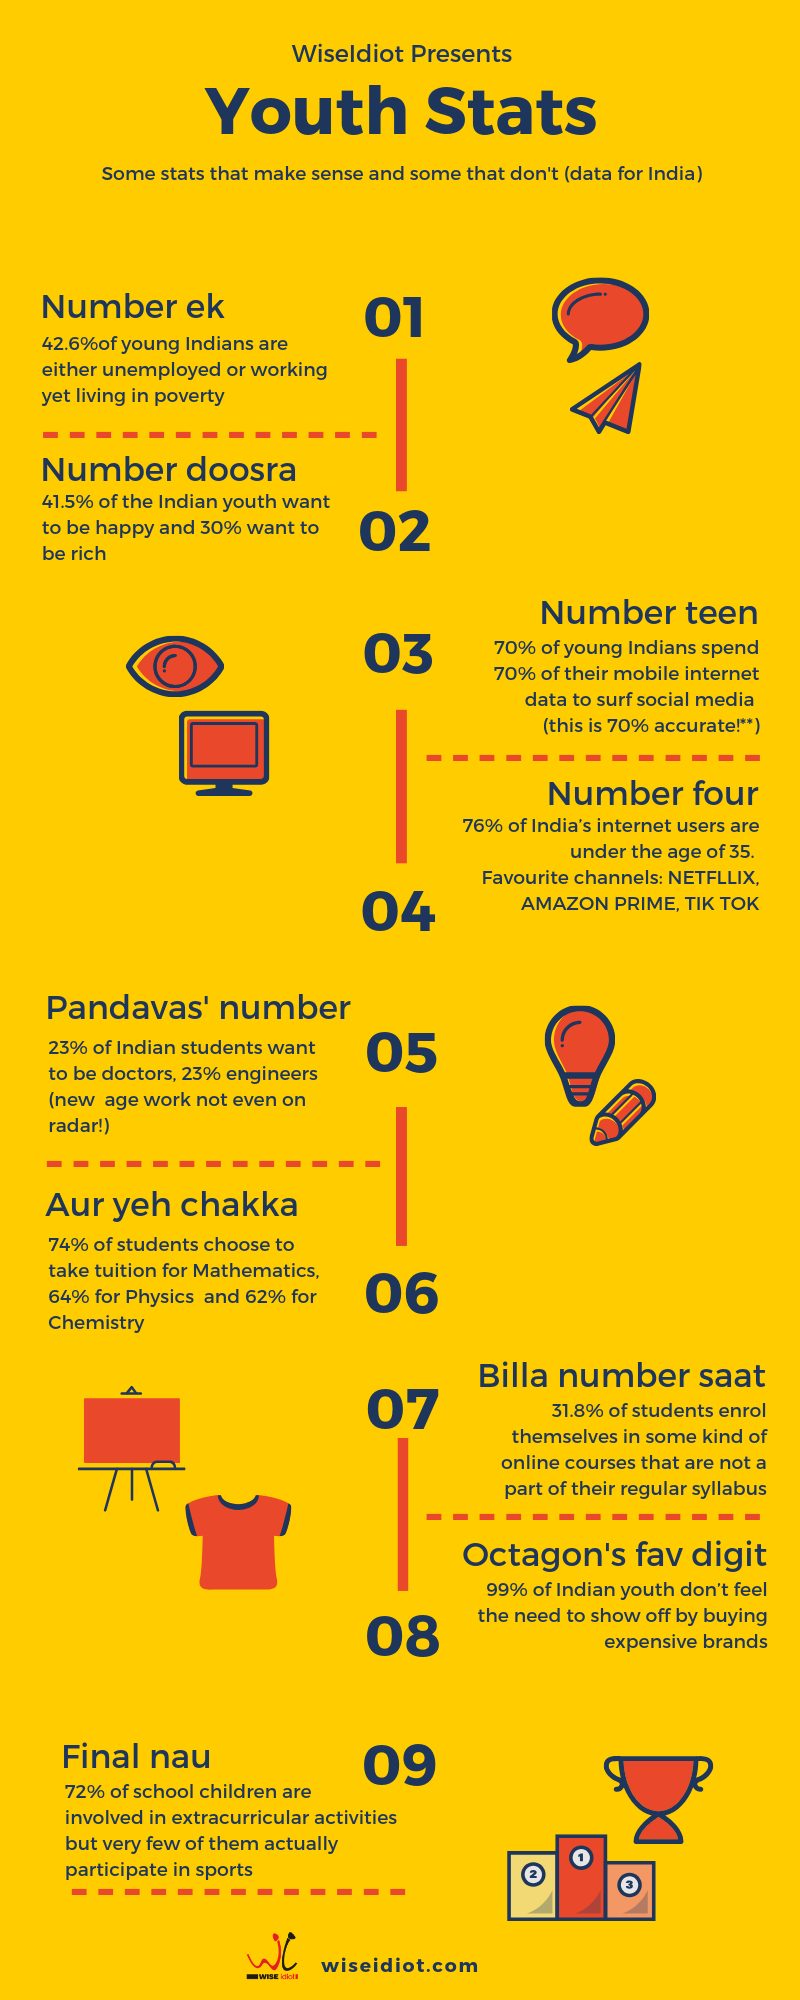 Interesting data on Indian youth